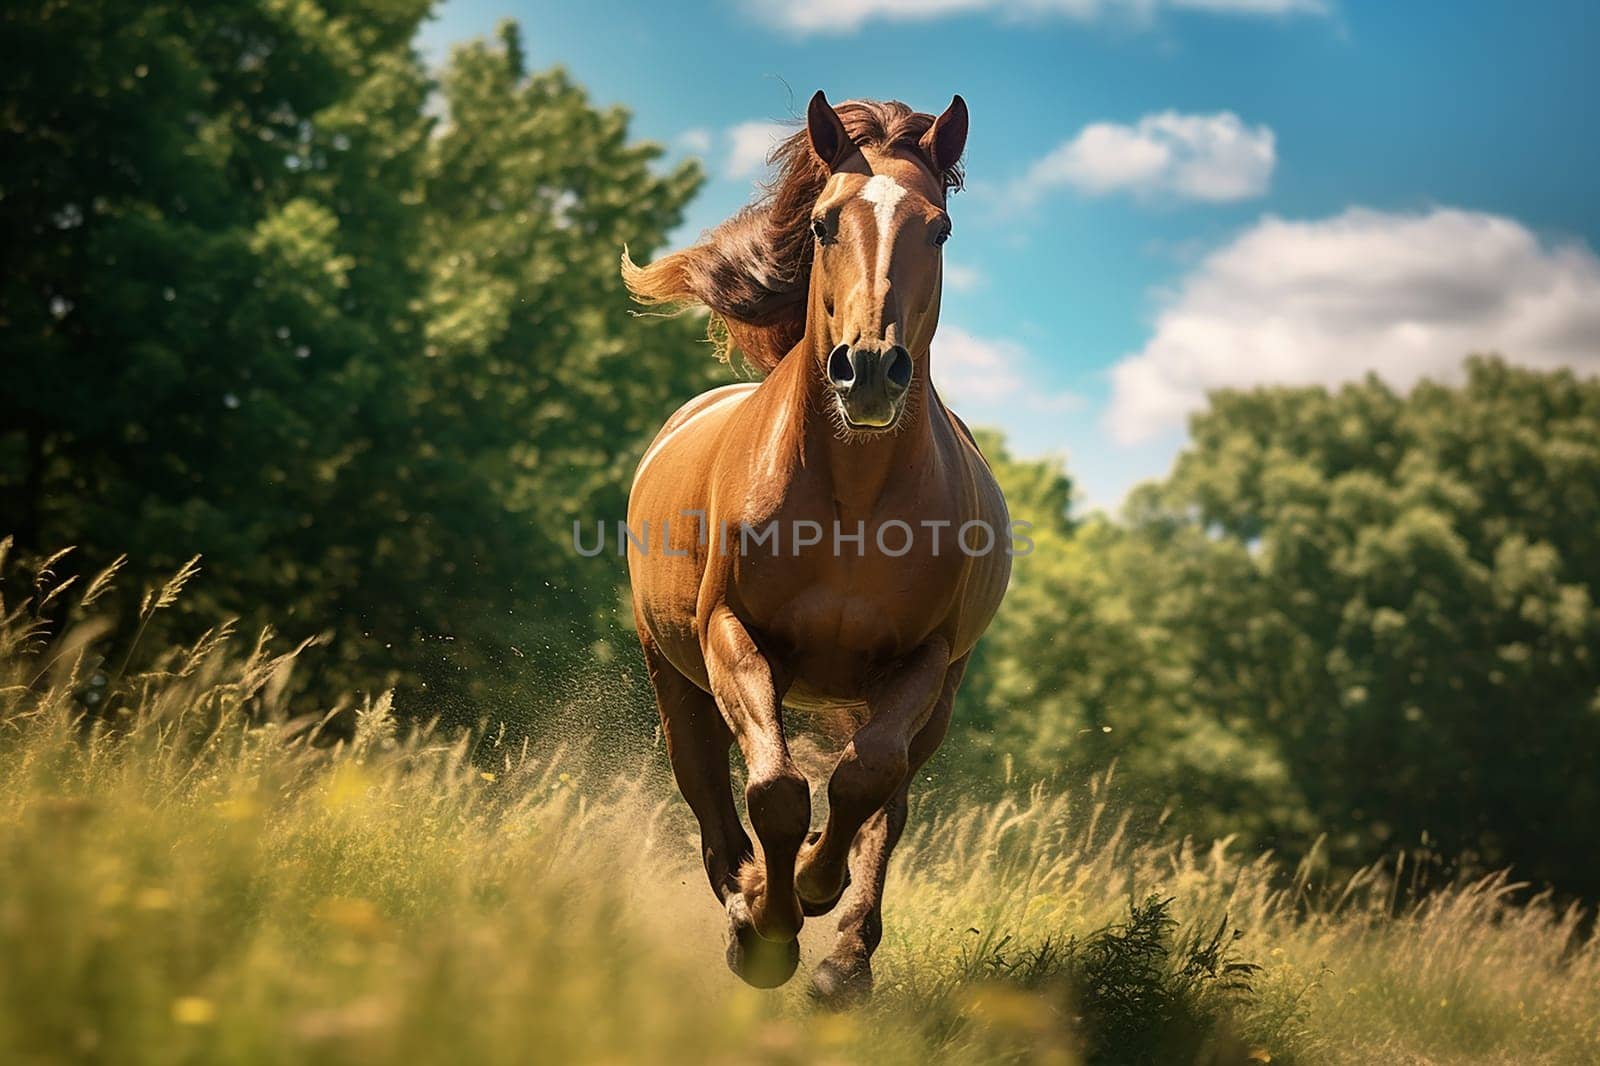 A beautiful horse running free in nature, freedom by Hype2art